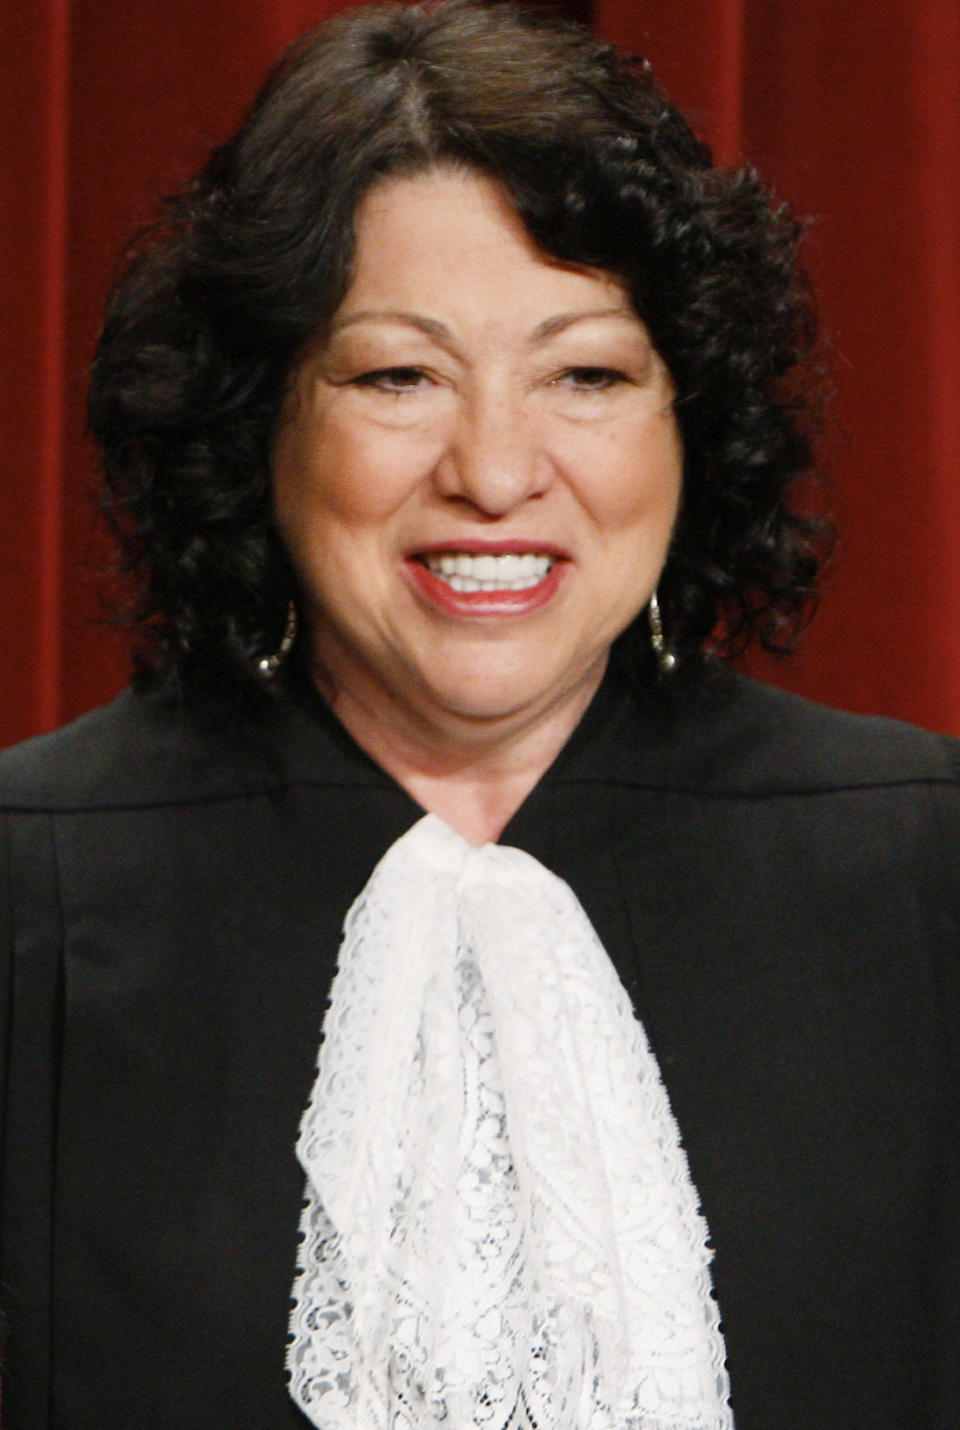 FILE - The newest Supreme Court member, Associate Justice Sonia Sotomayor, poses for a photo with her colleagues Sept. 29, 2009, at the Supreme Court in Washington. Sotomayor joined the Supreme Court in 2009 as the court's first Latina justice. (AP Photo/Charles Dharapak, File)